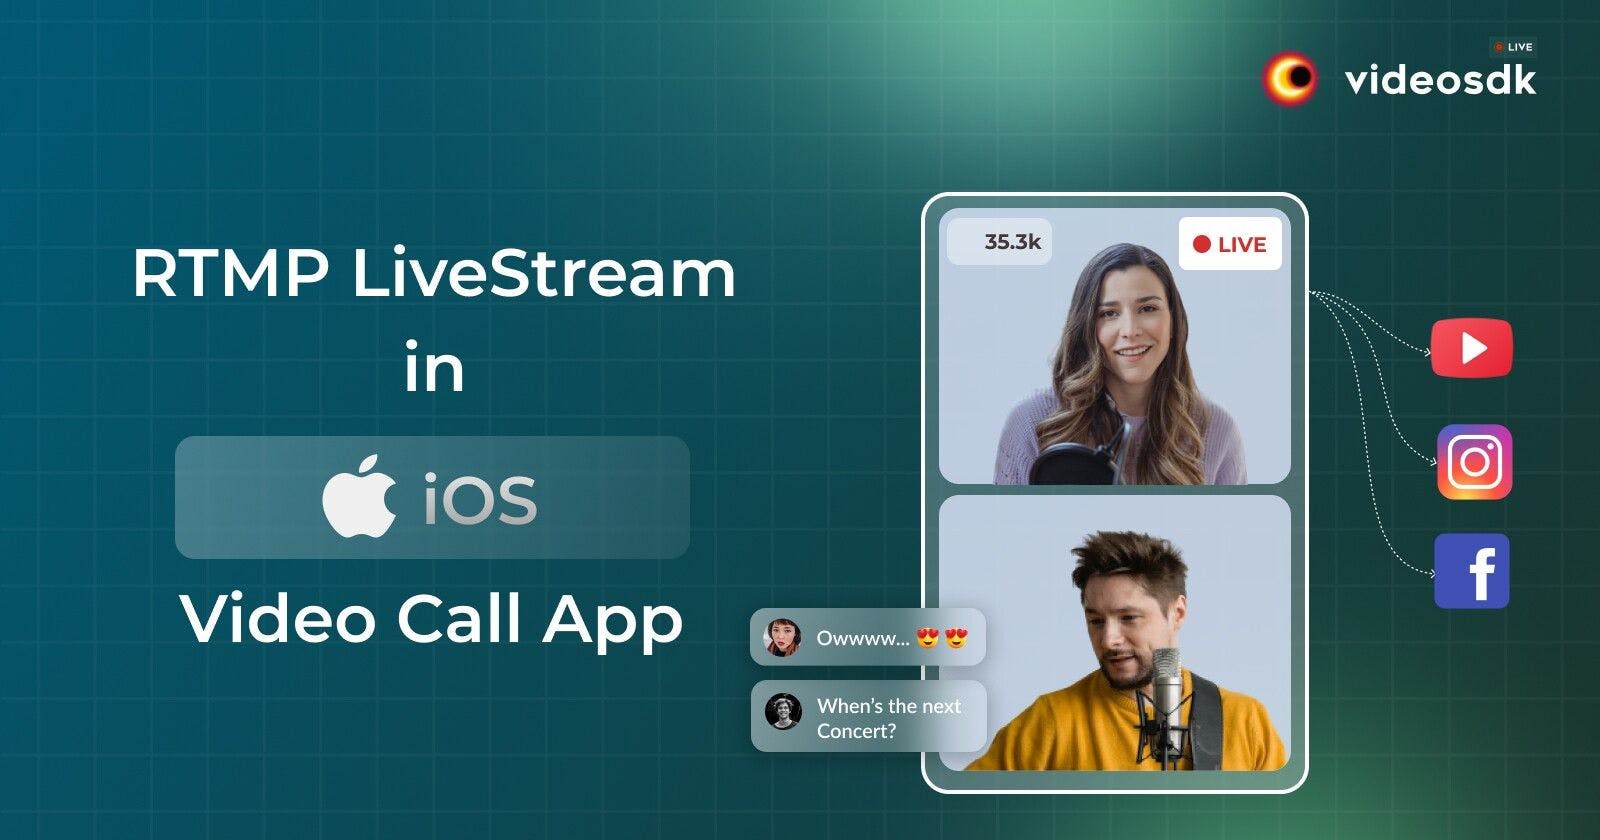 How to Integrate RTMP Live Stream in iOS Video Call App?